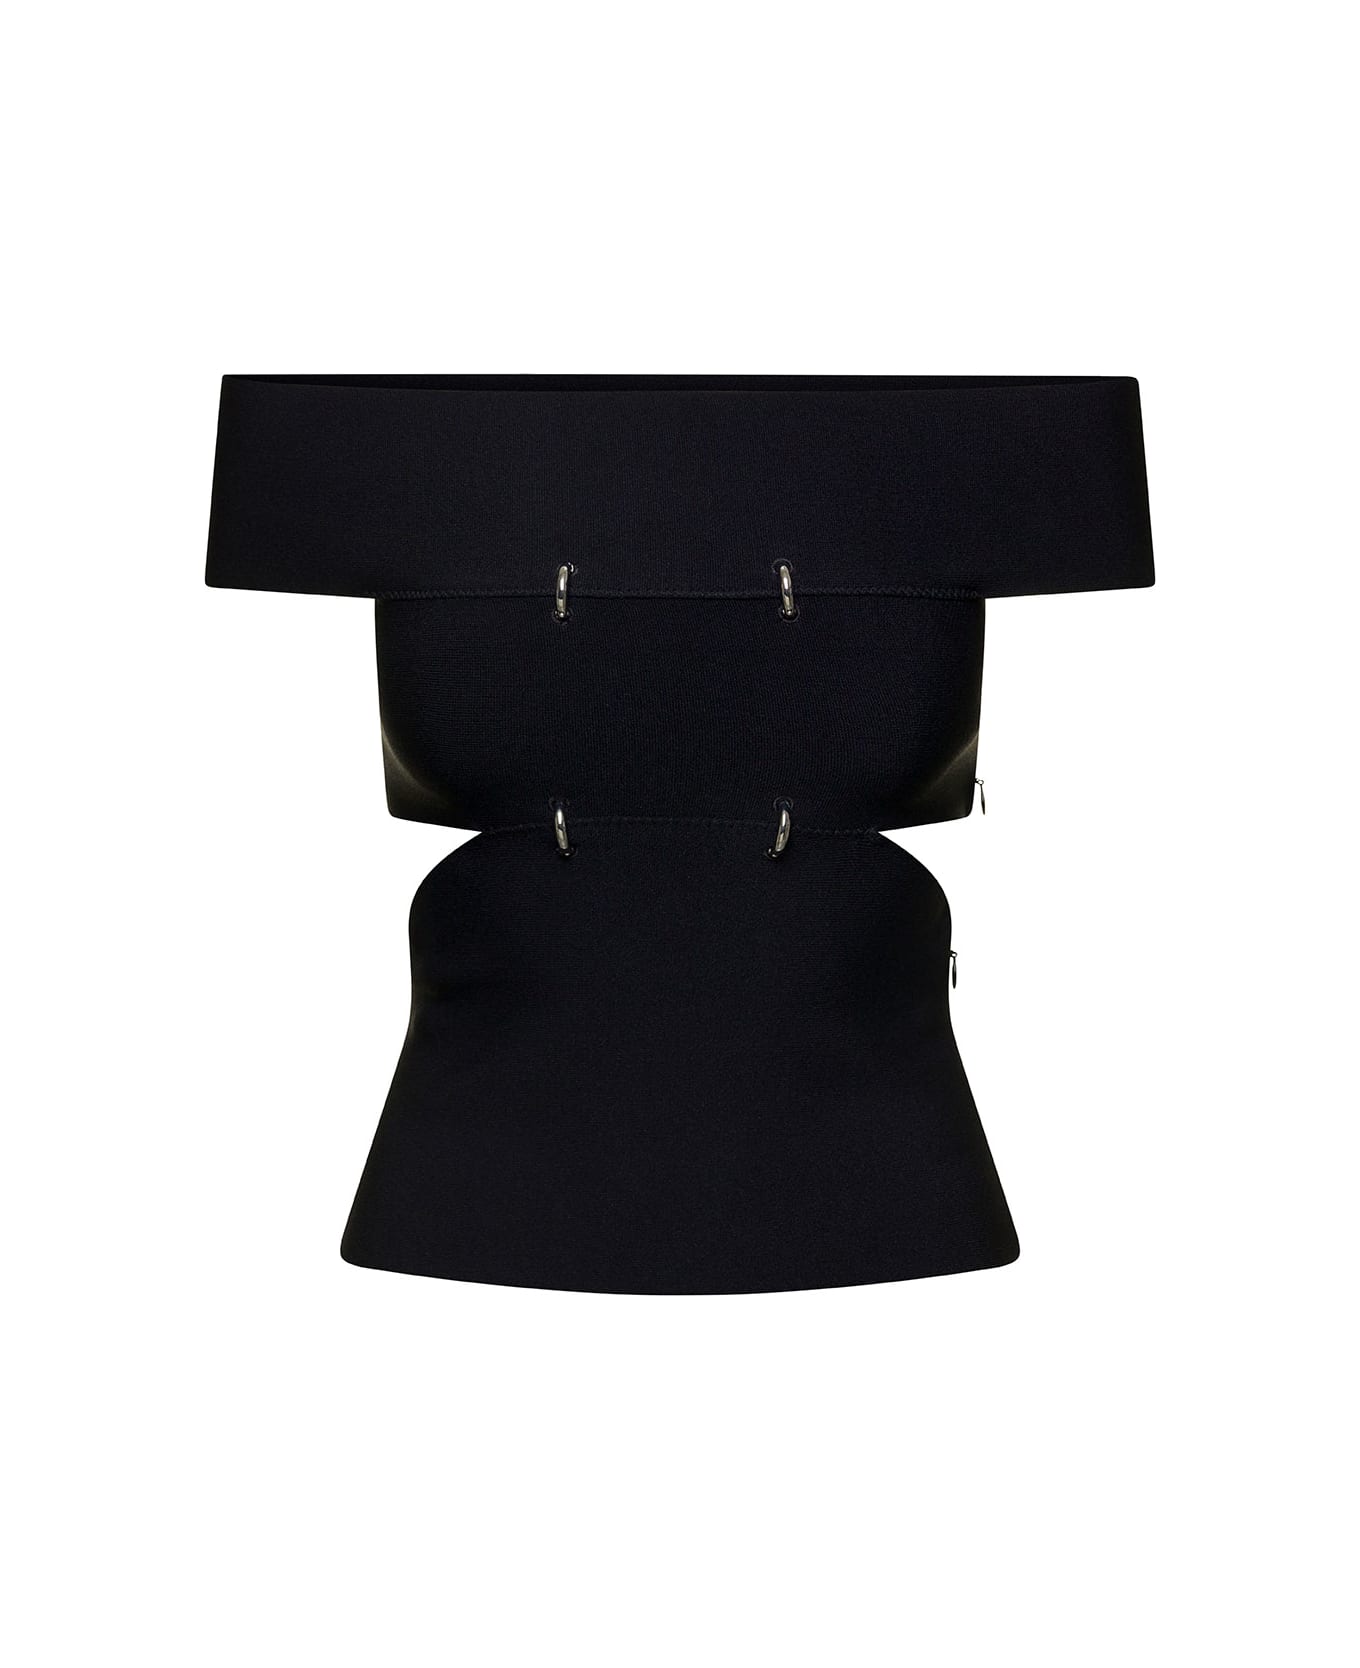 Alexander McQueen Black Off-the-shoulders Top With Cut-out And Metal Rings In Viscose Blend Woman - Black トップス